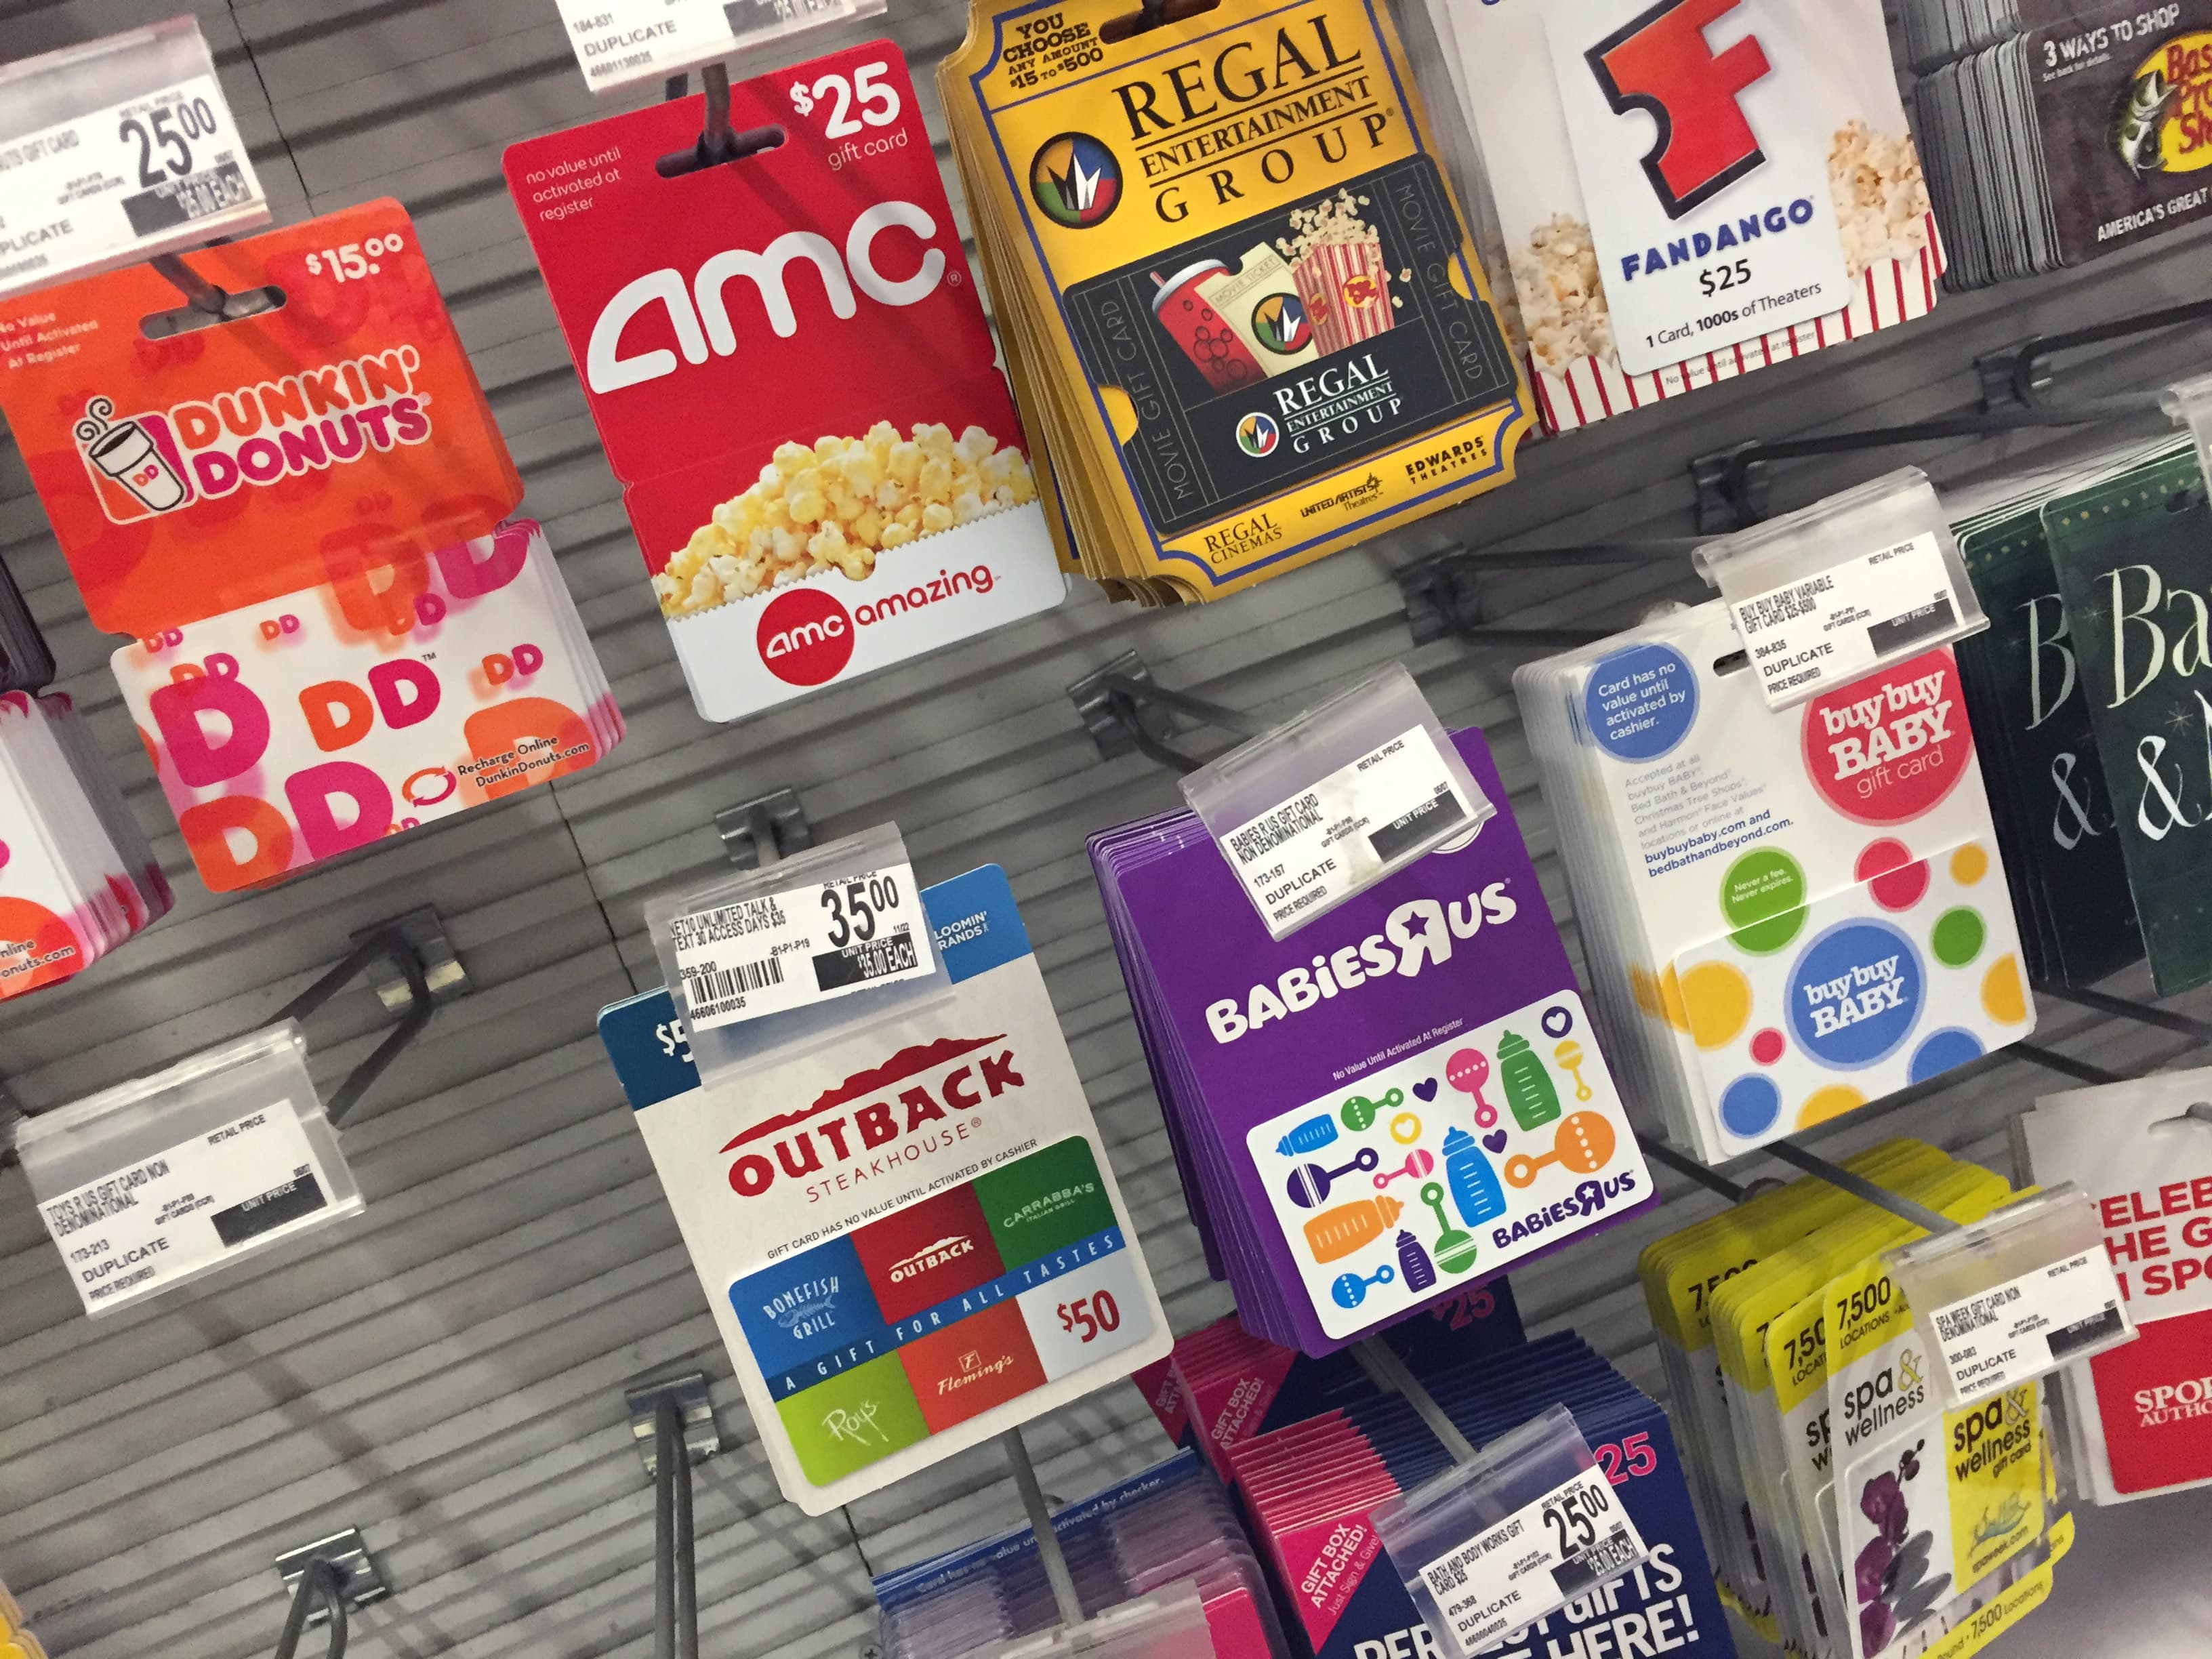 These are the top 10 best gift cards